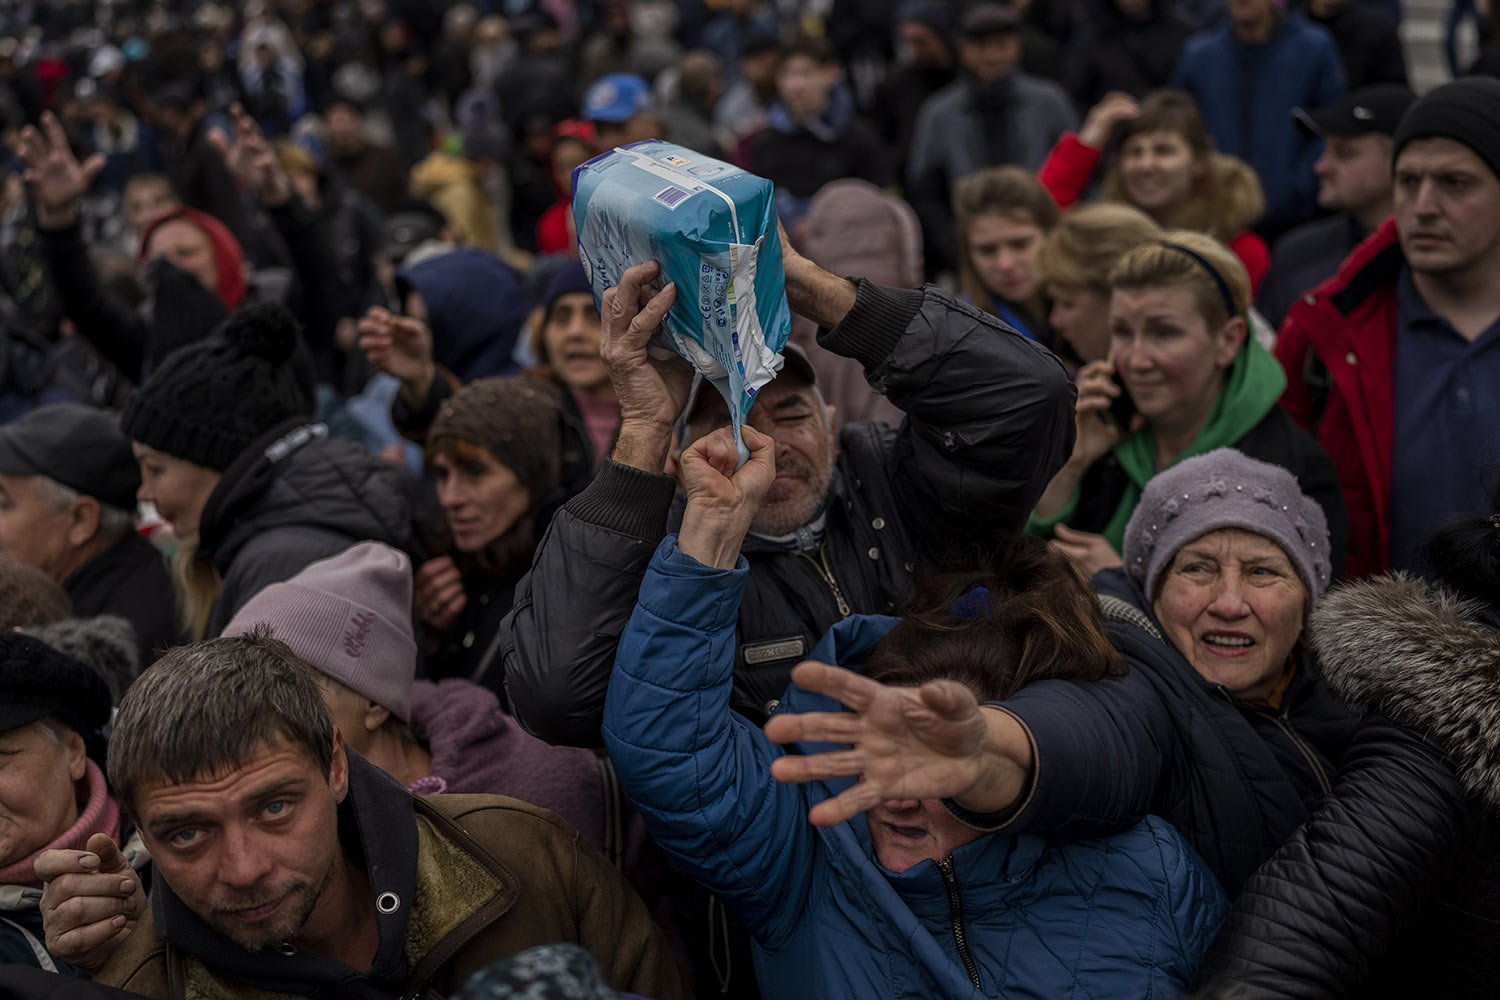  Residents gather at an aid distribution point for supplies in downtown Kherson, southern Ukraine, Nov. 18, 2022. (AP Photo/Bernat Armangue) 